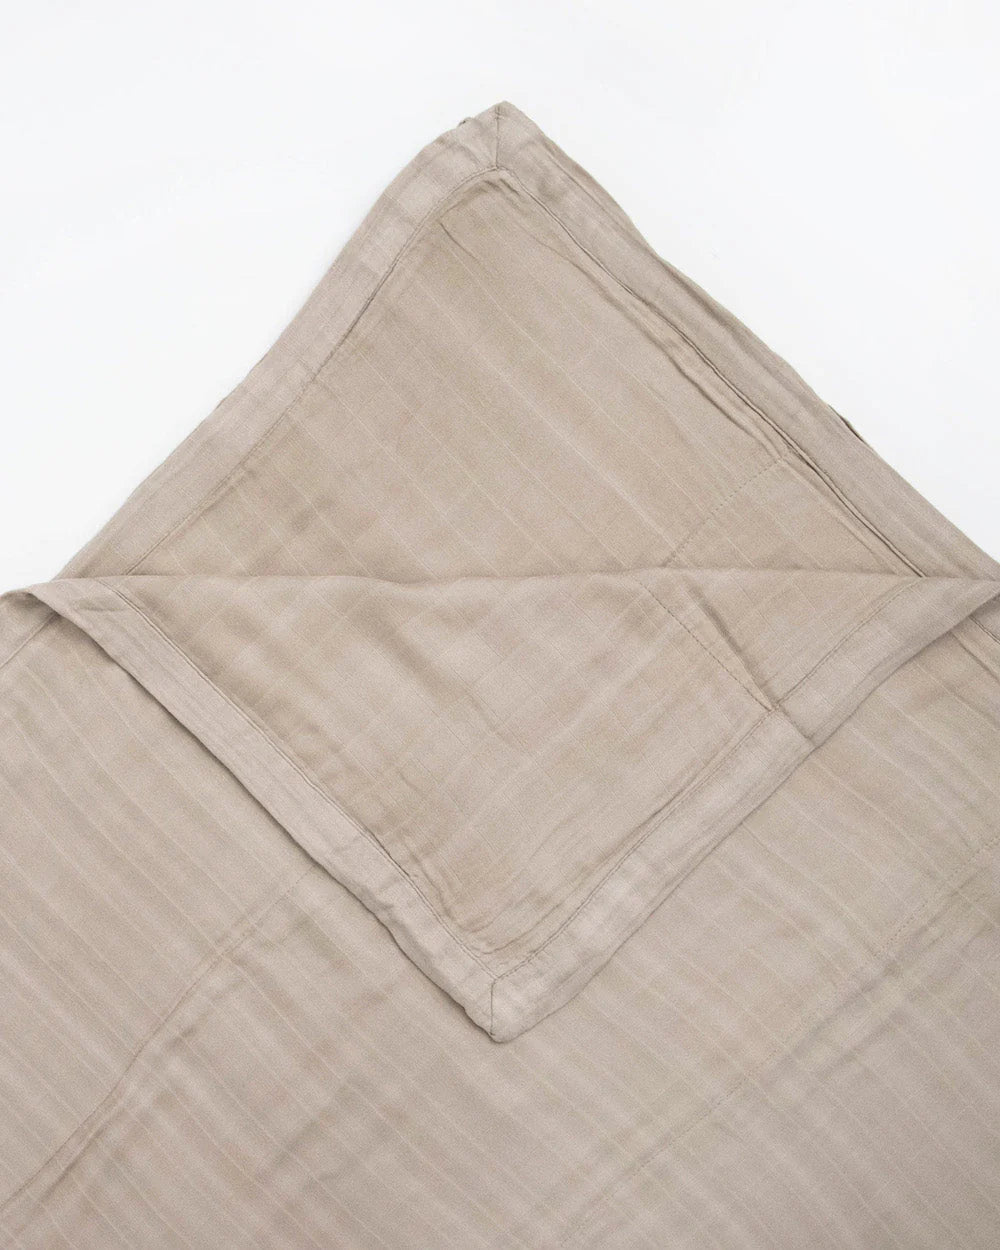 Deluxe Muslin Quilted Throw - Oatmeal